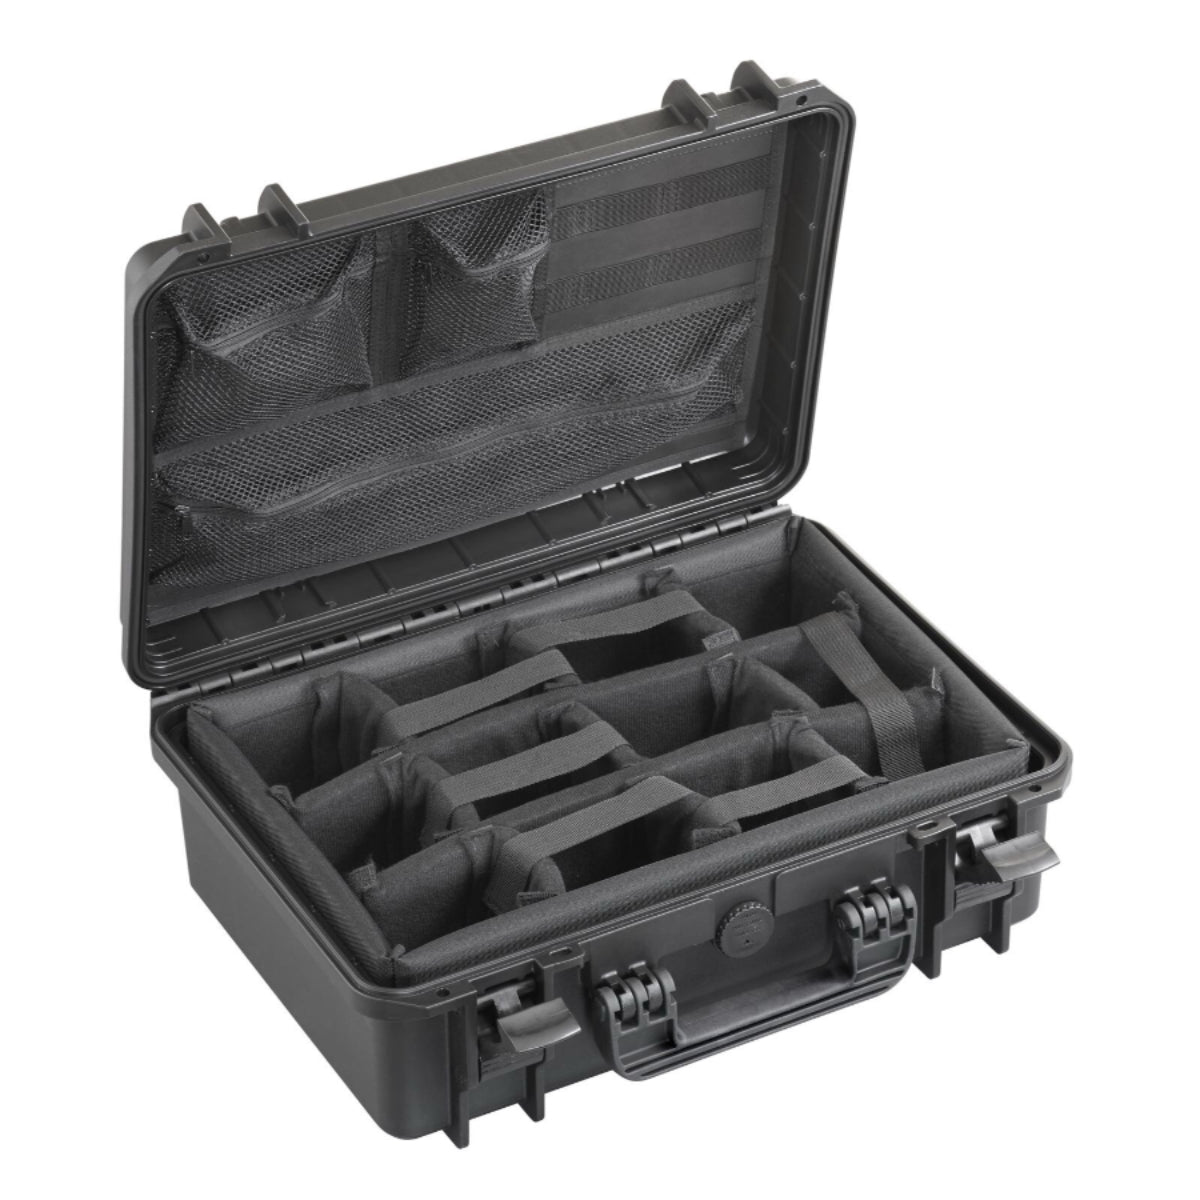 SP PRO 430CAMORG Black Carry Case, Padded Dividers + Lid Organizer, ID: L426xW290xH159mm